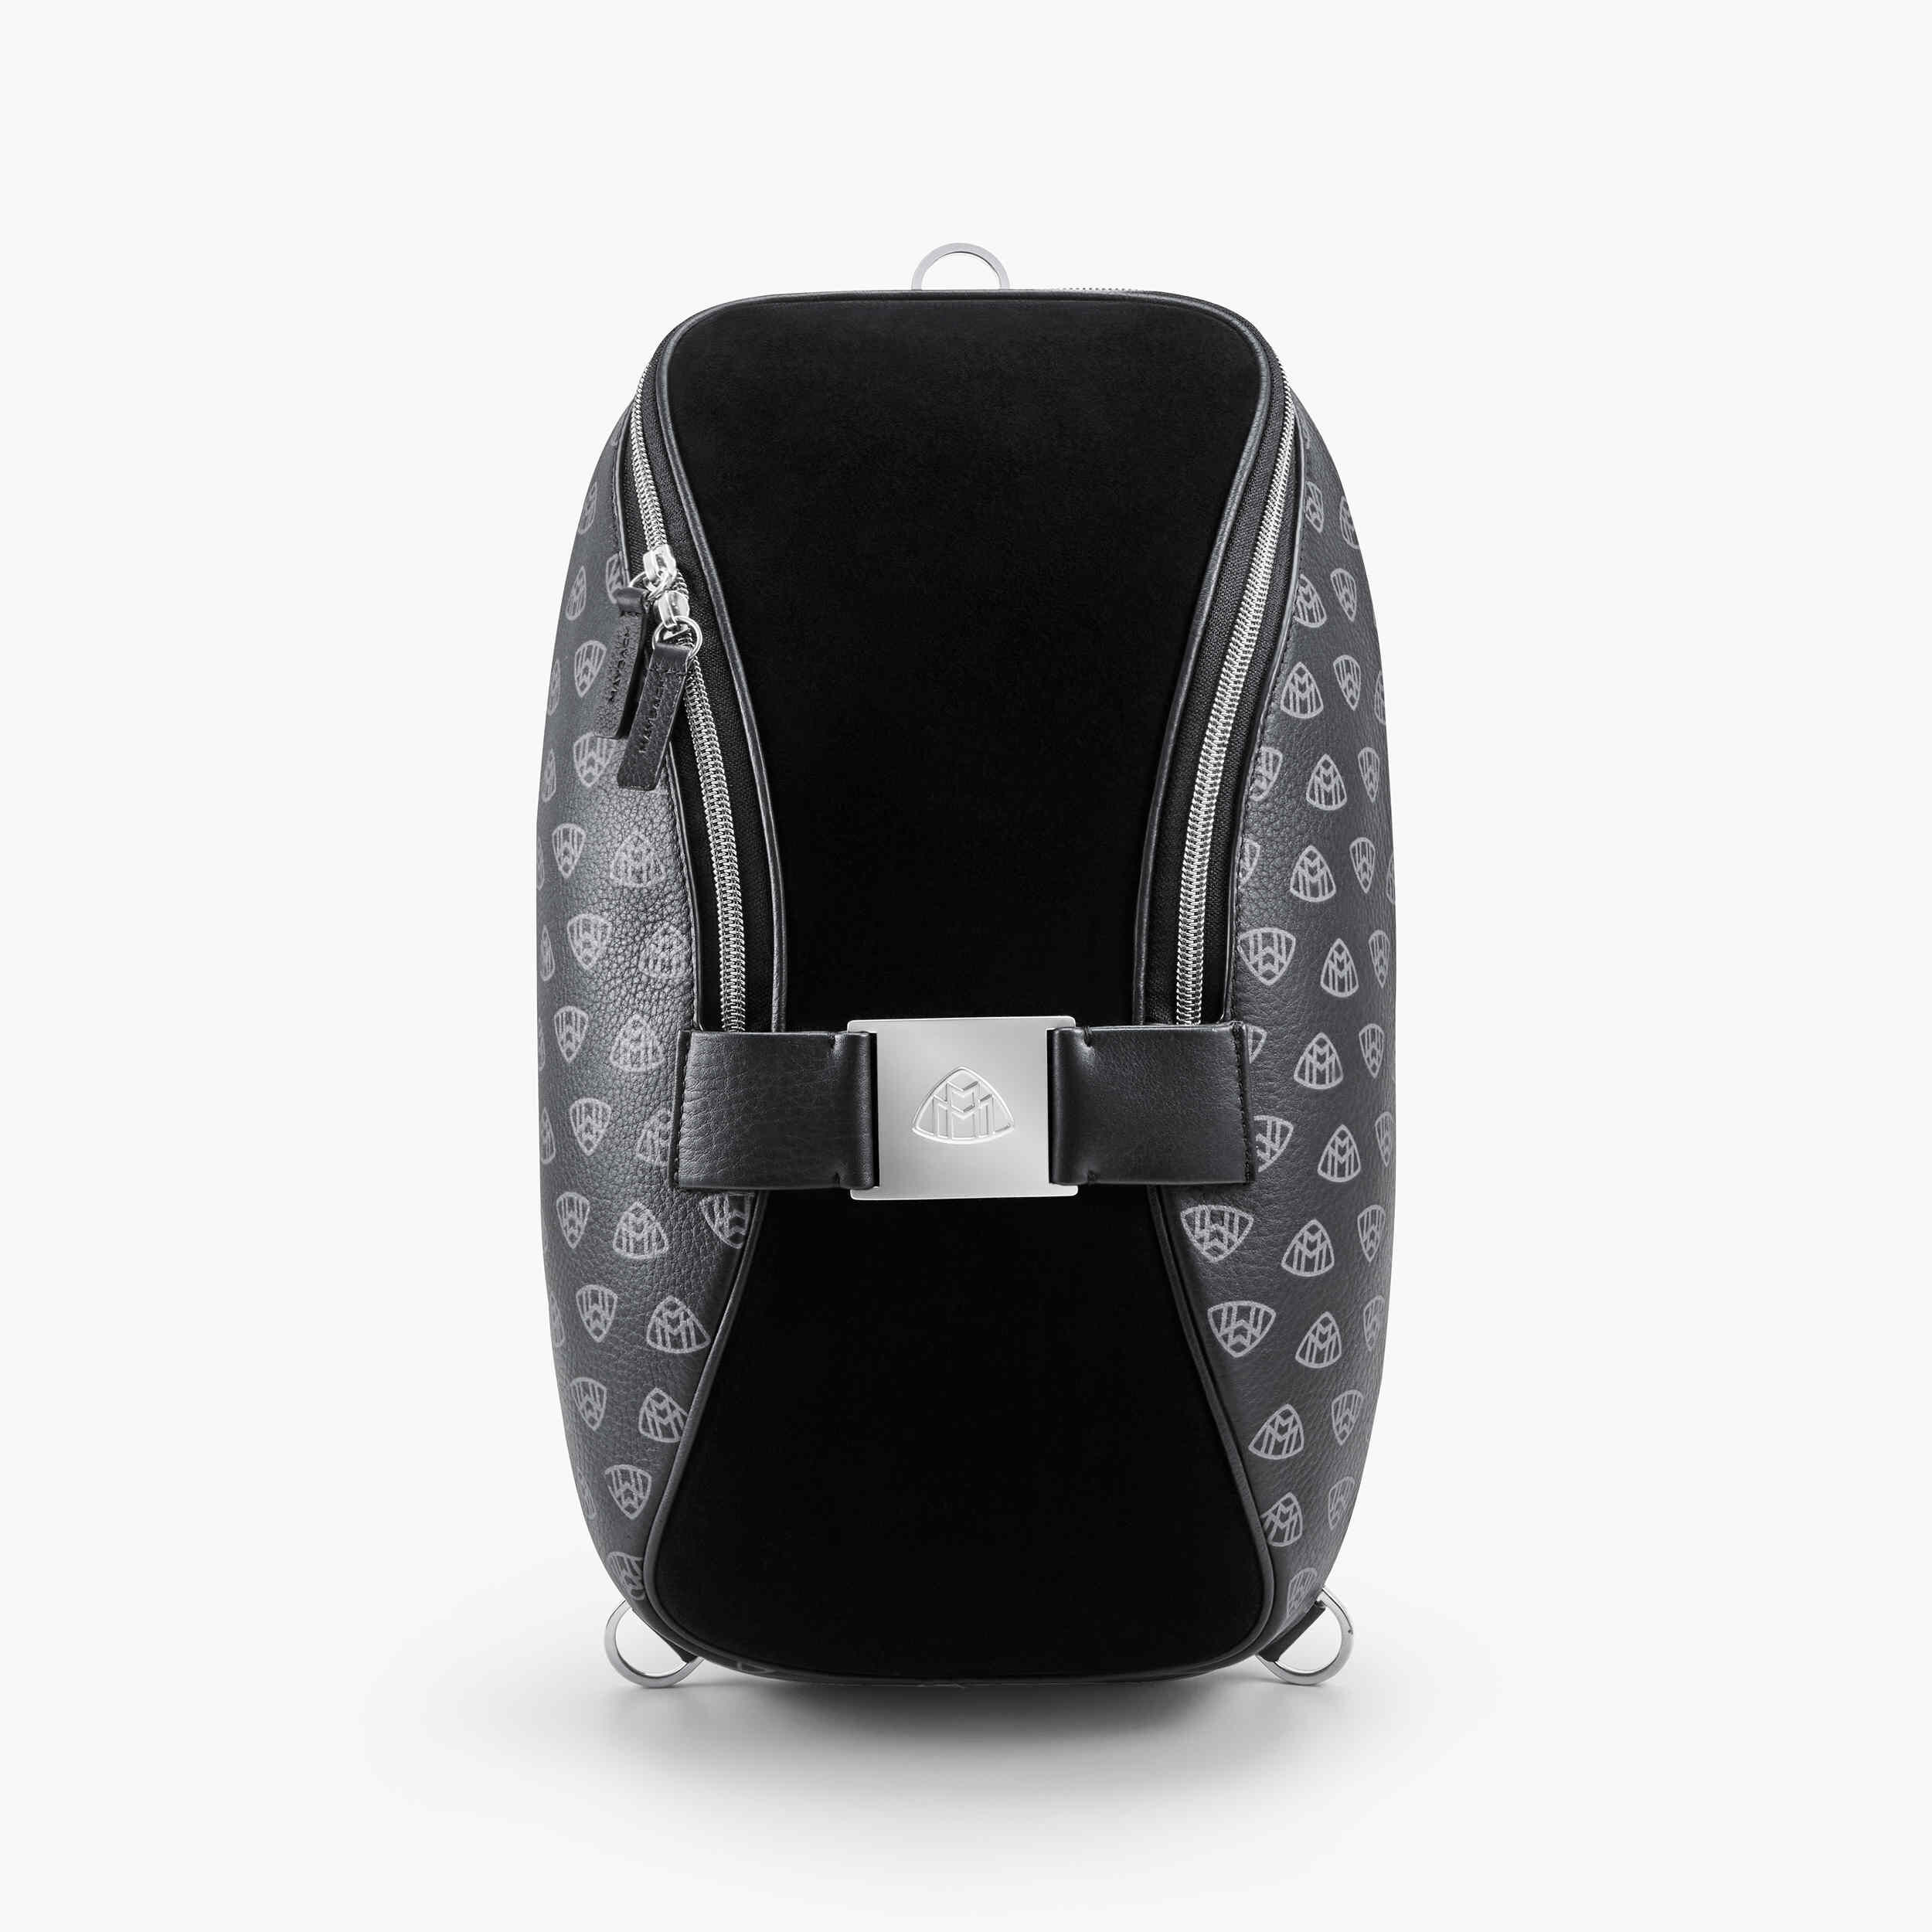 The Cocoon Bag I